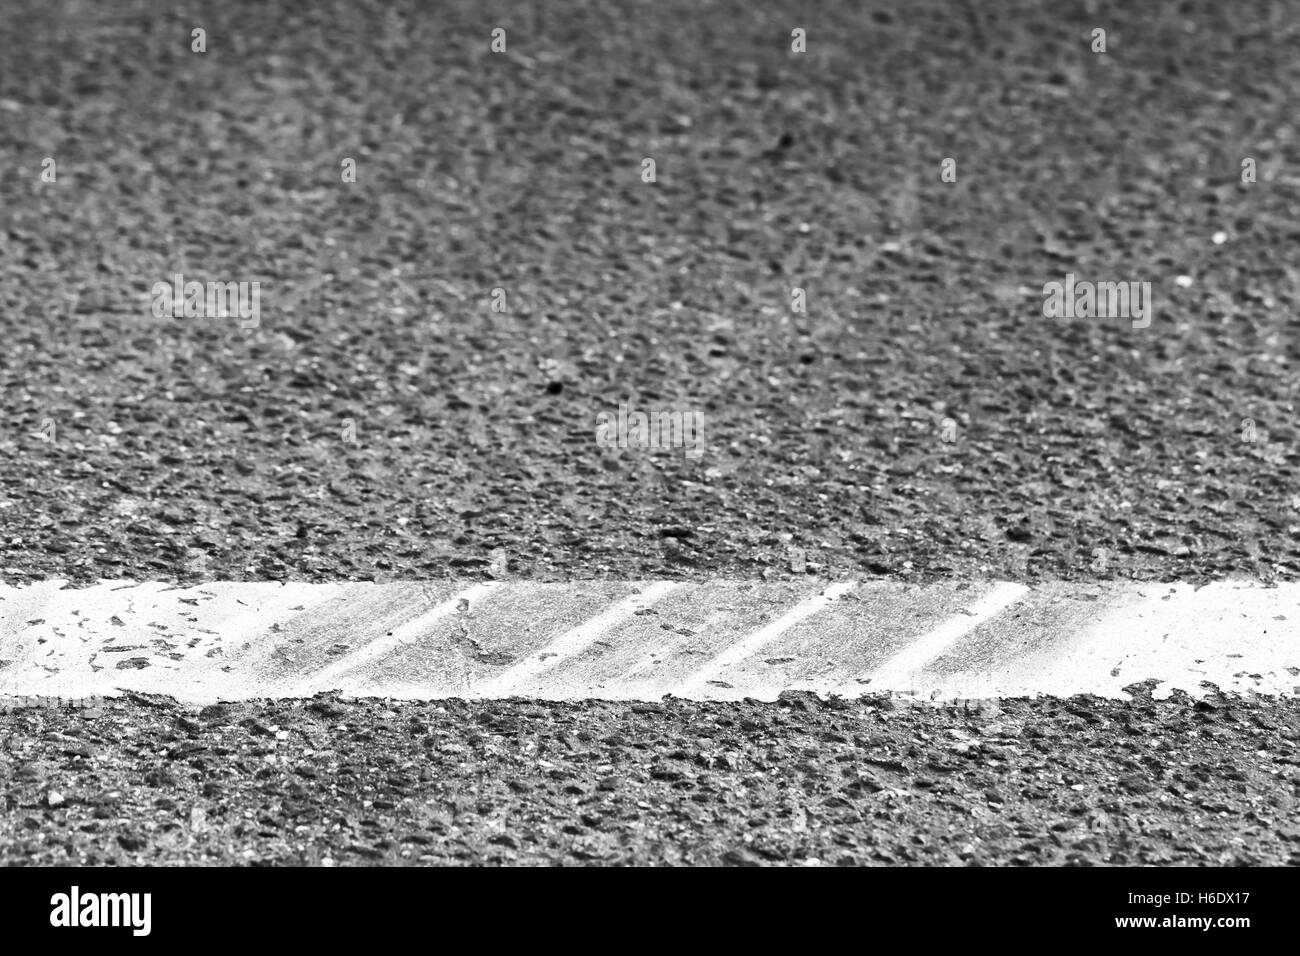 Dividing line with tire tracks over it, highway road marking fragment. Abstract transportation background Stock Photo